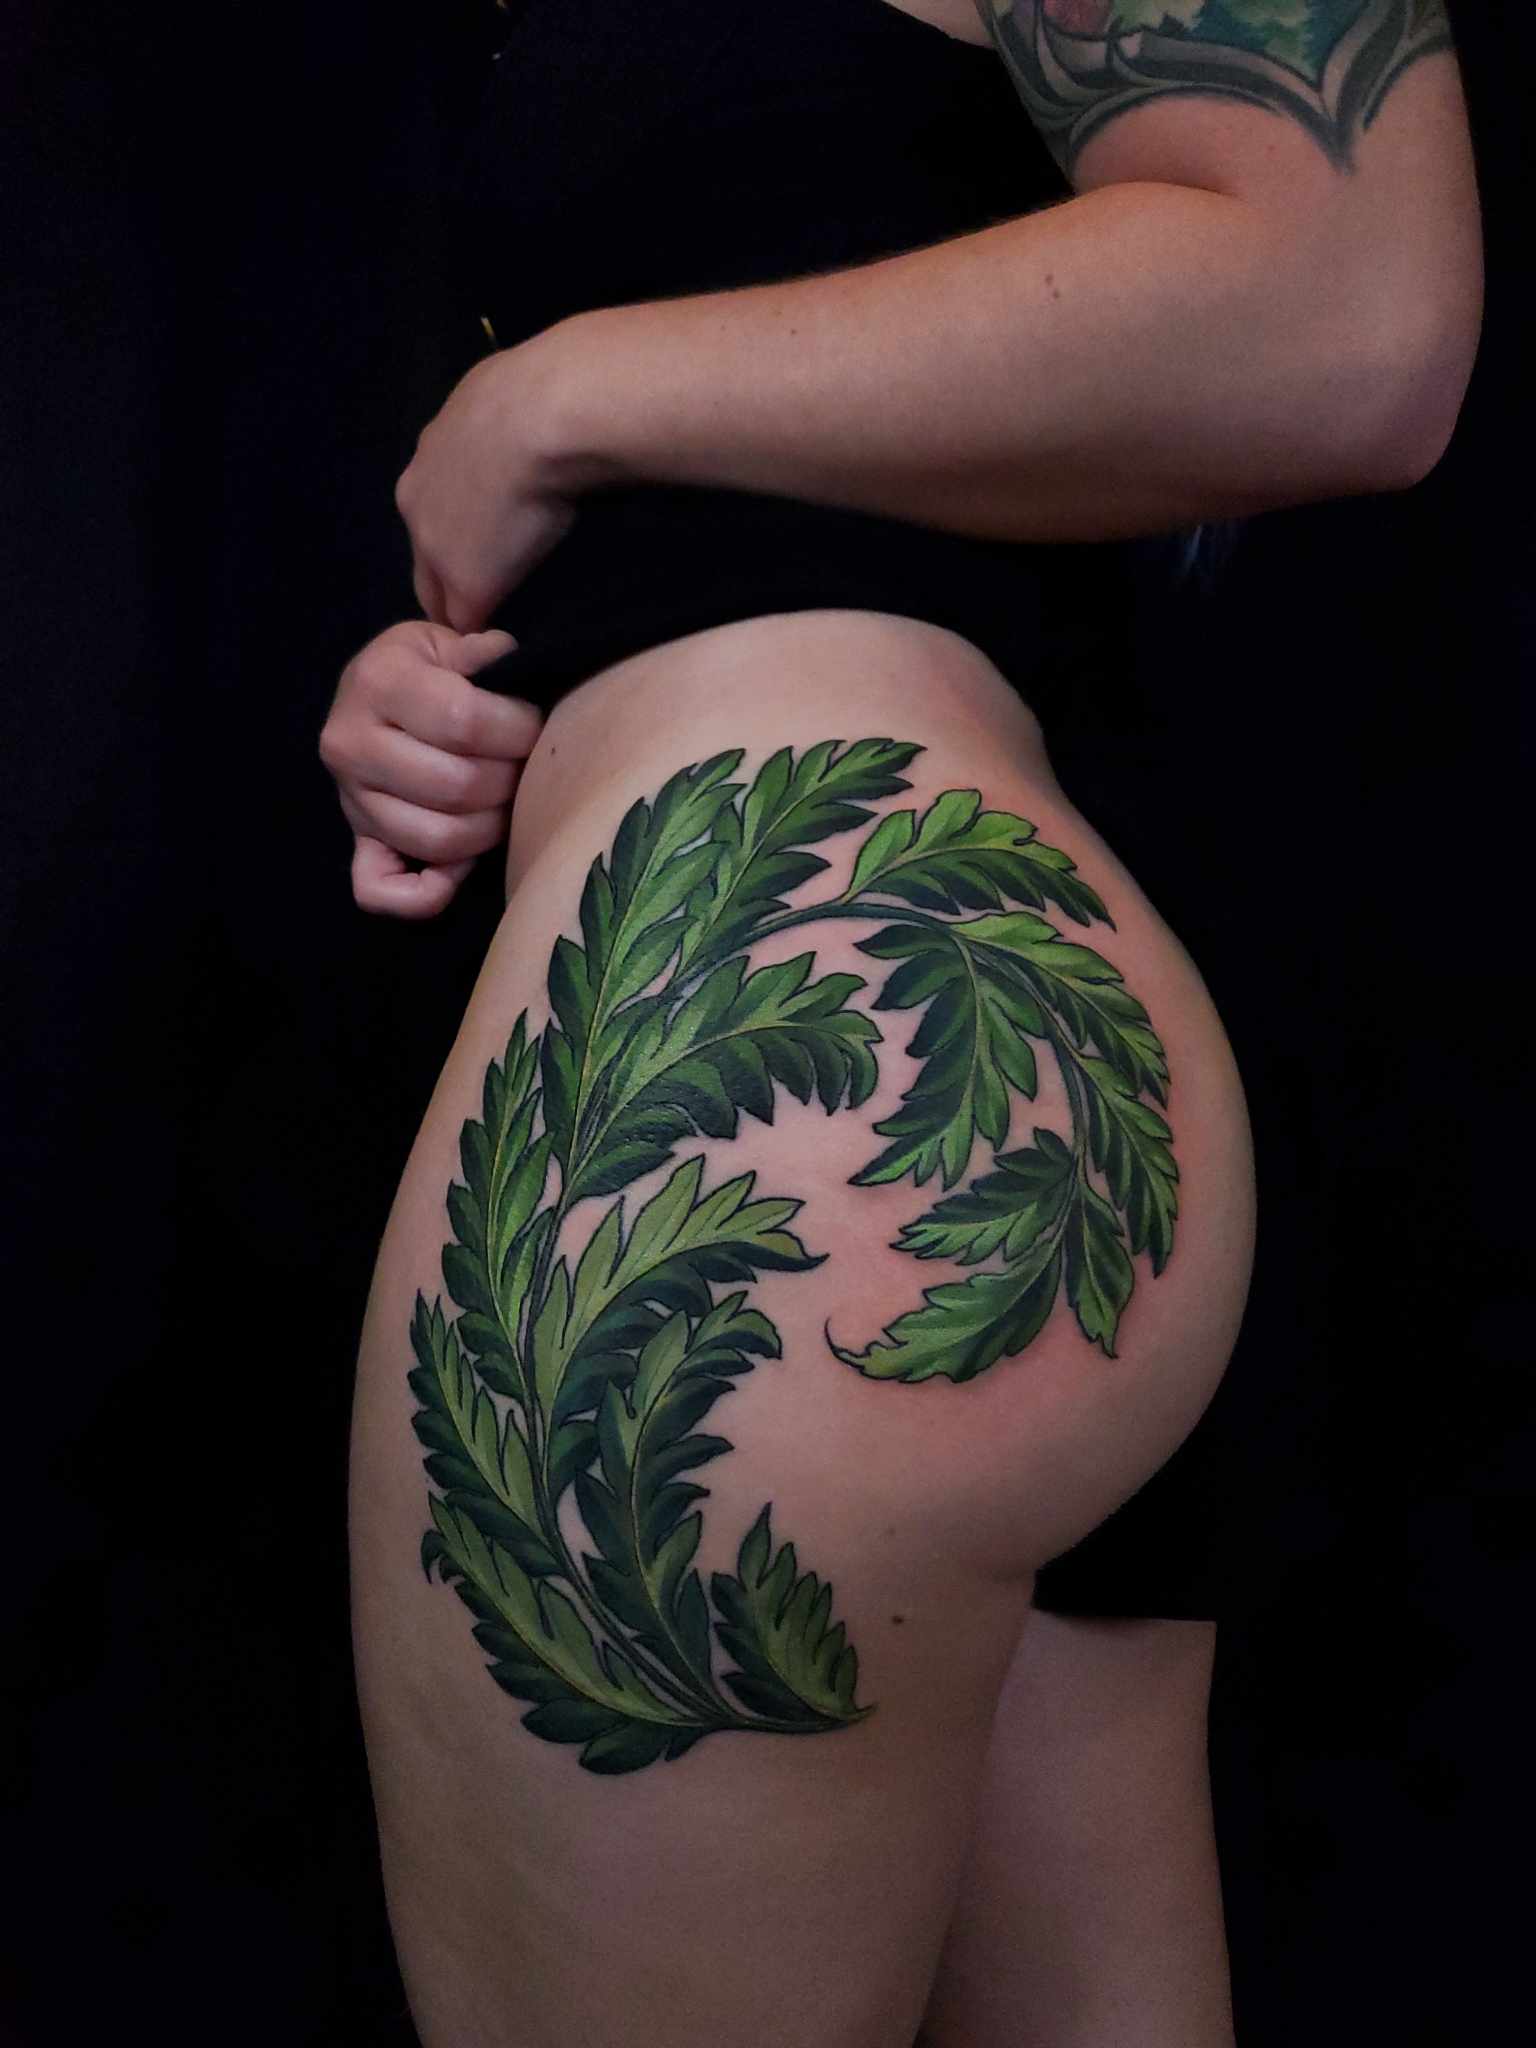 Tattoo tagged with: fern leaf, big, leaf, facebook, nature, realistic,  upper back, twitter, ritkit | inked-app.com